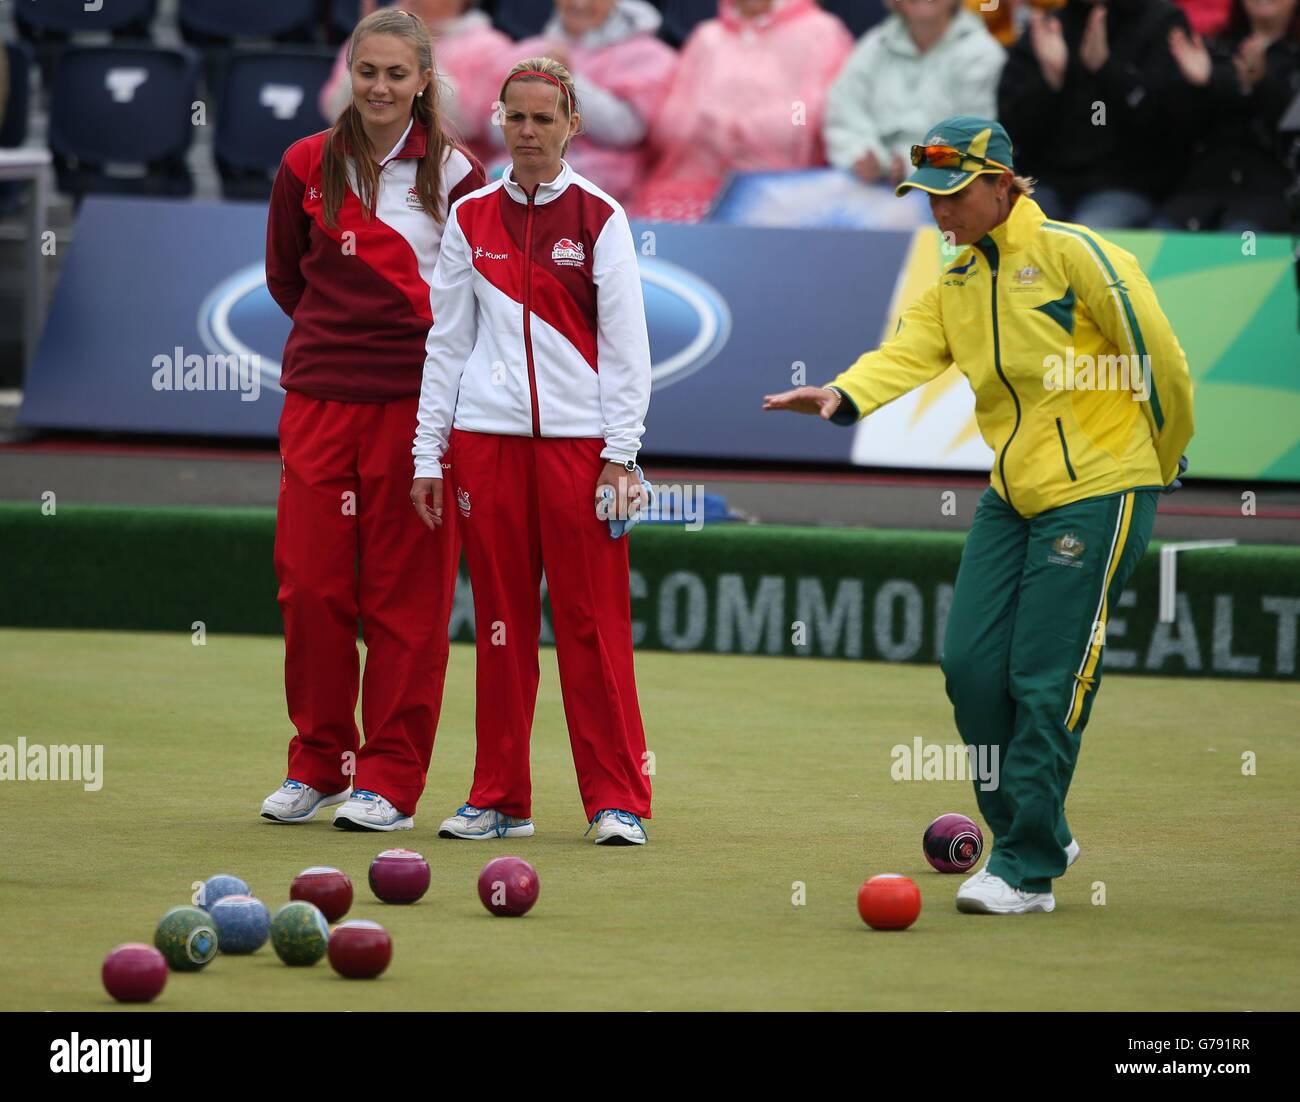 England's Sophie Tolchard and Ellen Falkner watch a shot during the Women's Triples match against Australia at Kelvingrove Lawn Bowls Centre, during the 2014 Commonwealth Games in Glasgow. Stock Photo